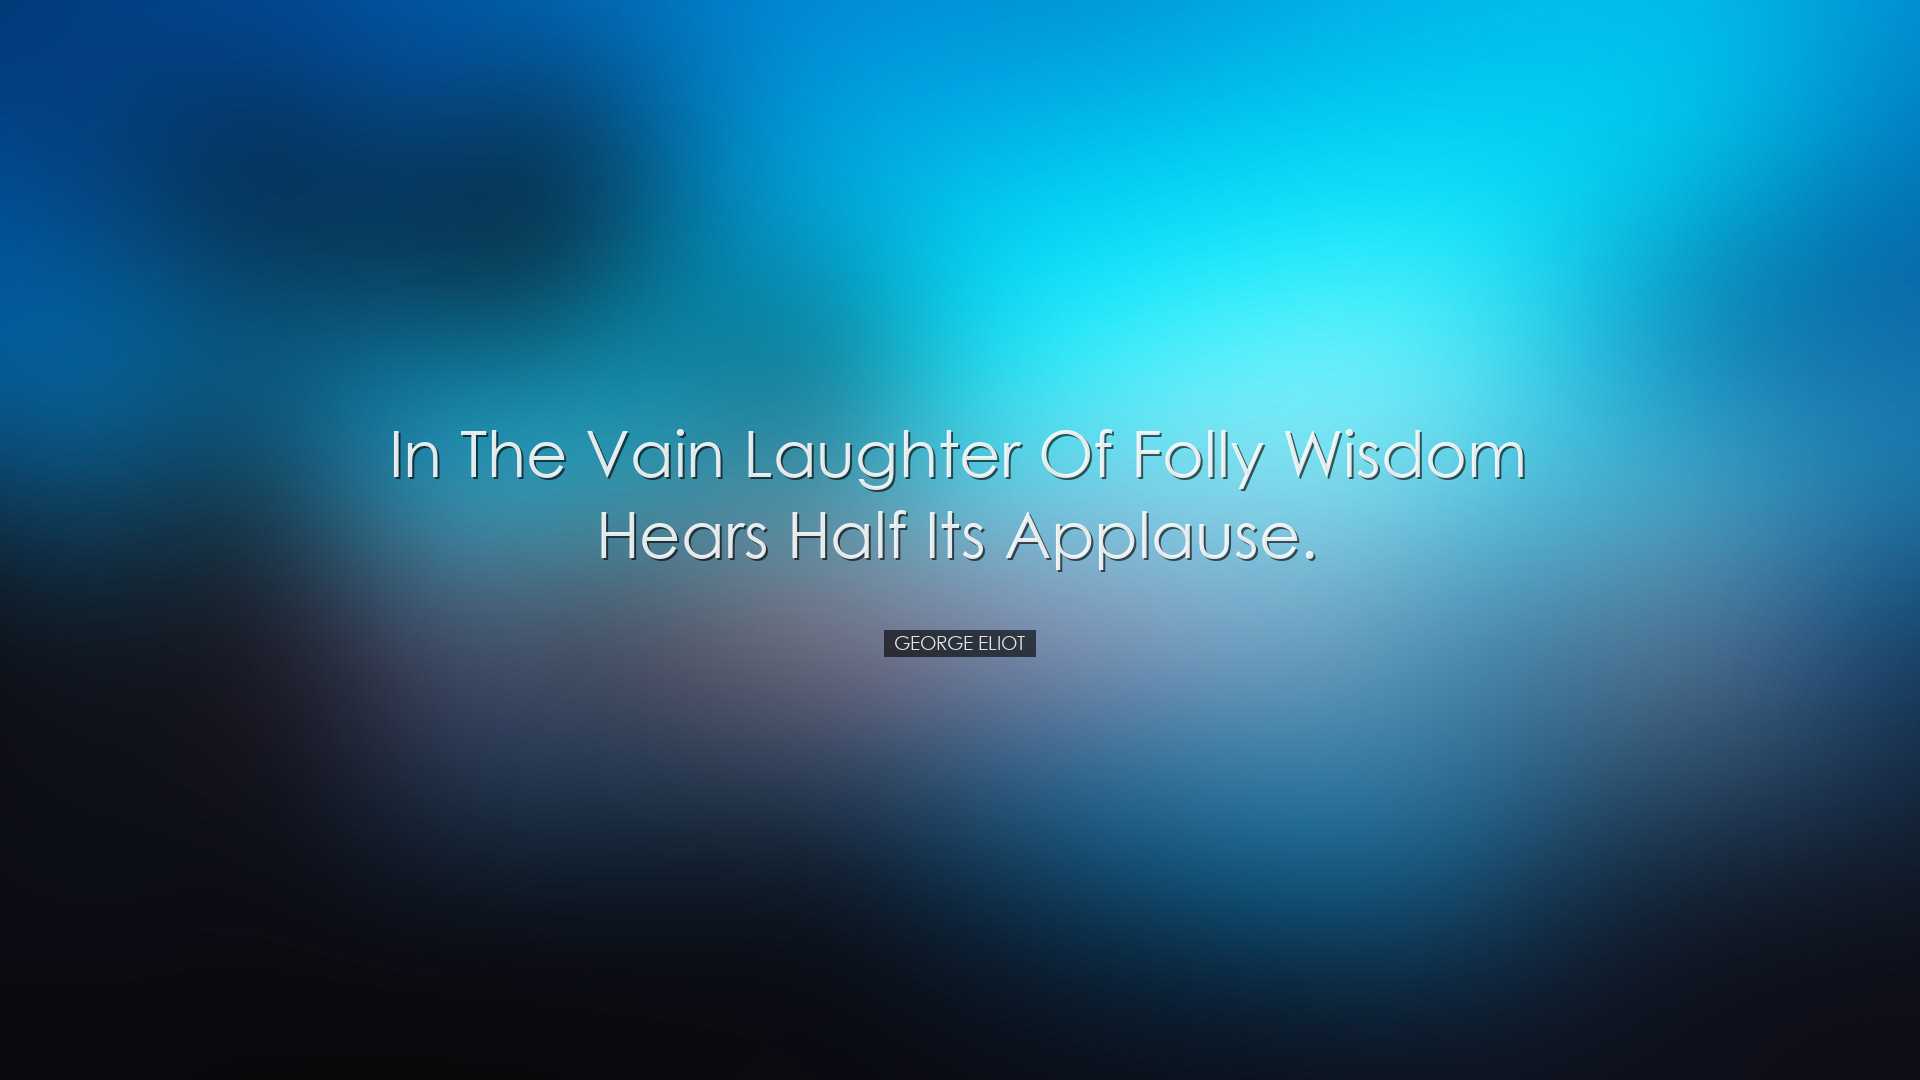 In the vain laughter of folly wisdom hears half its applause. - Ge